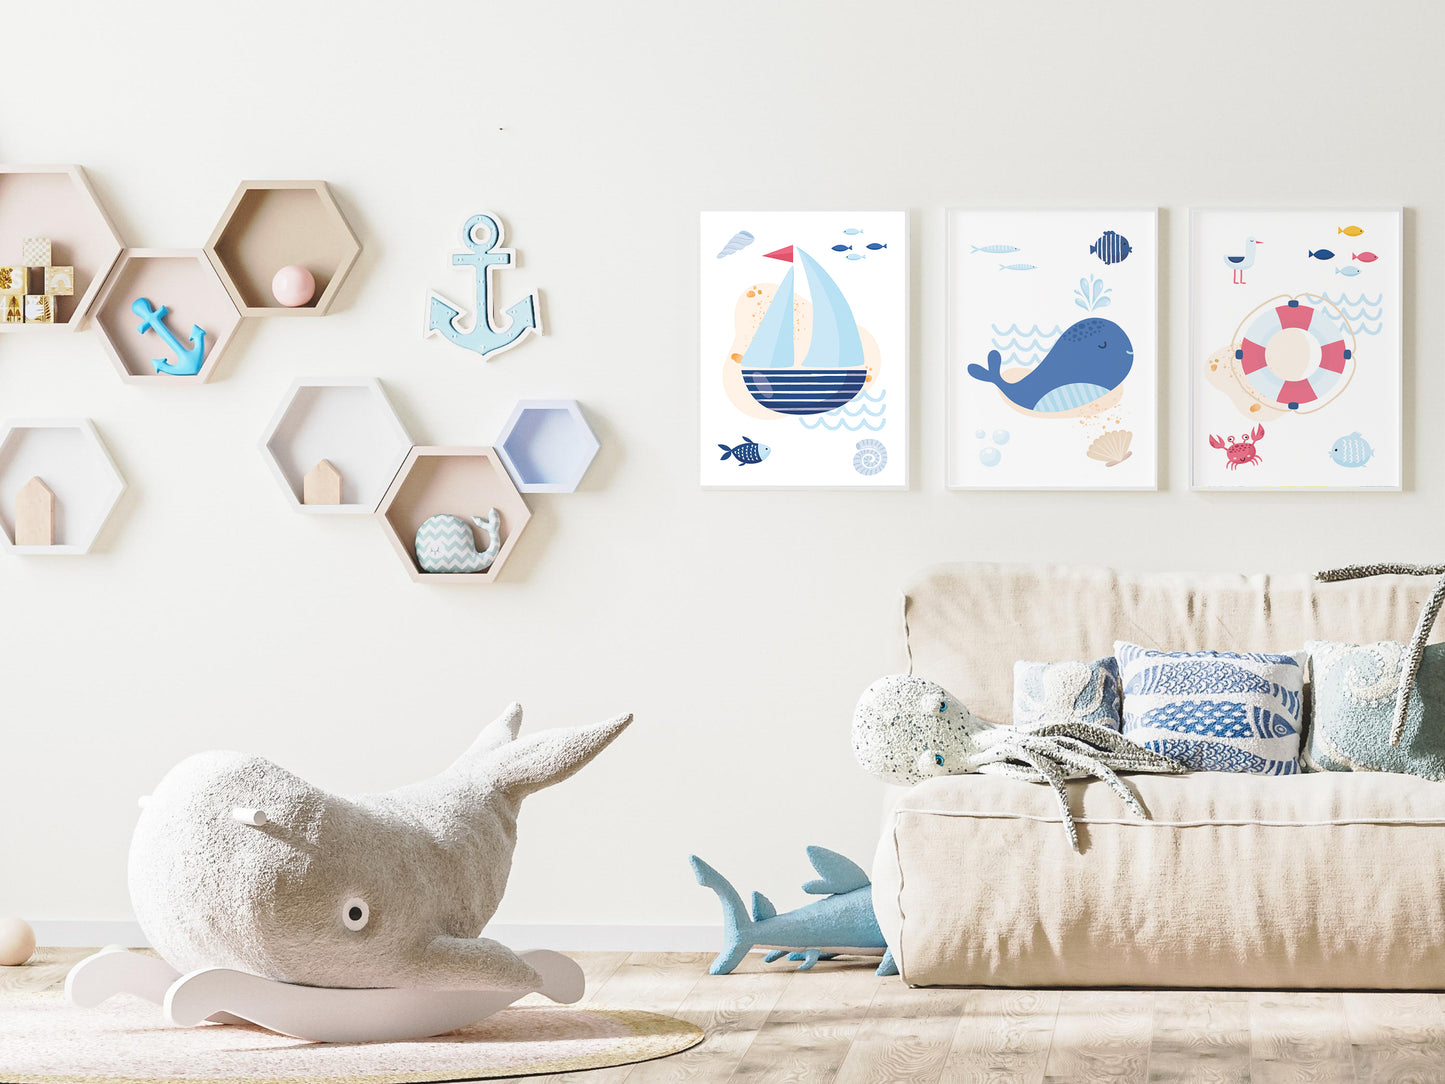 Posters sailor boat fish whale shell - 3 posters baby child room - Decoration - birth gift - ocean sea - bb deco ocean